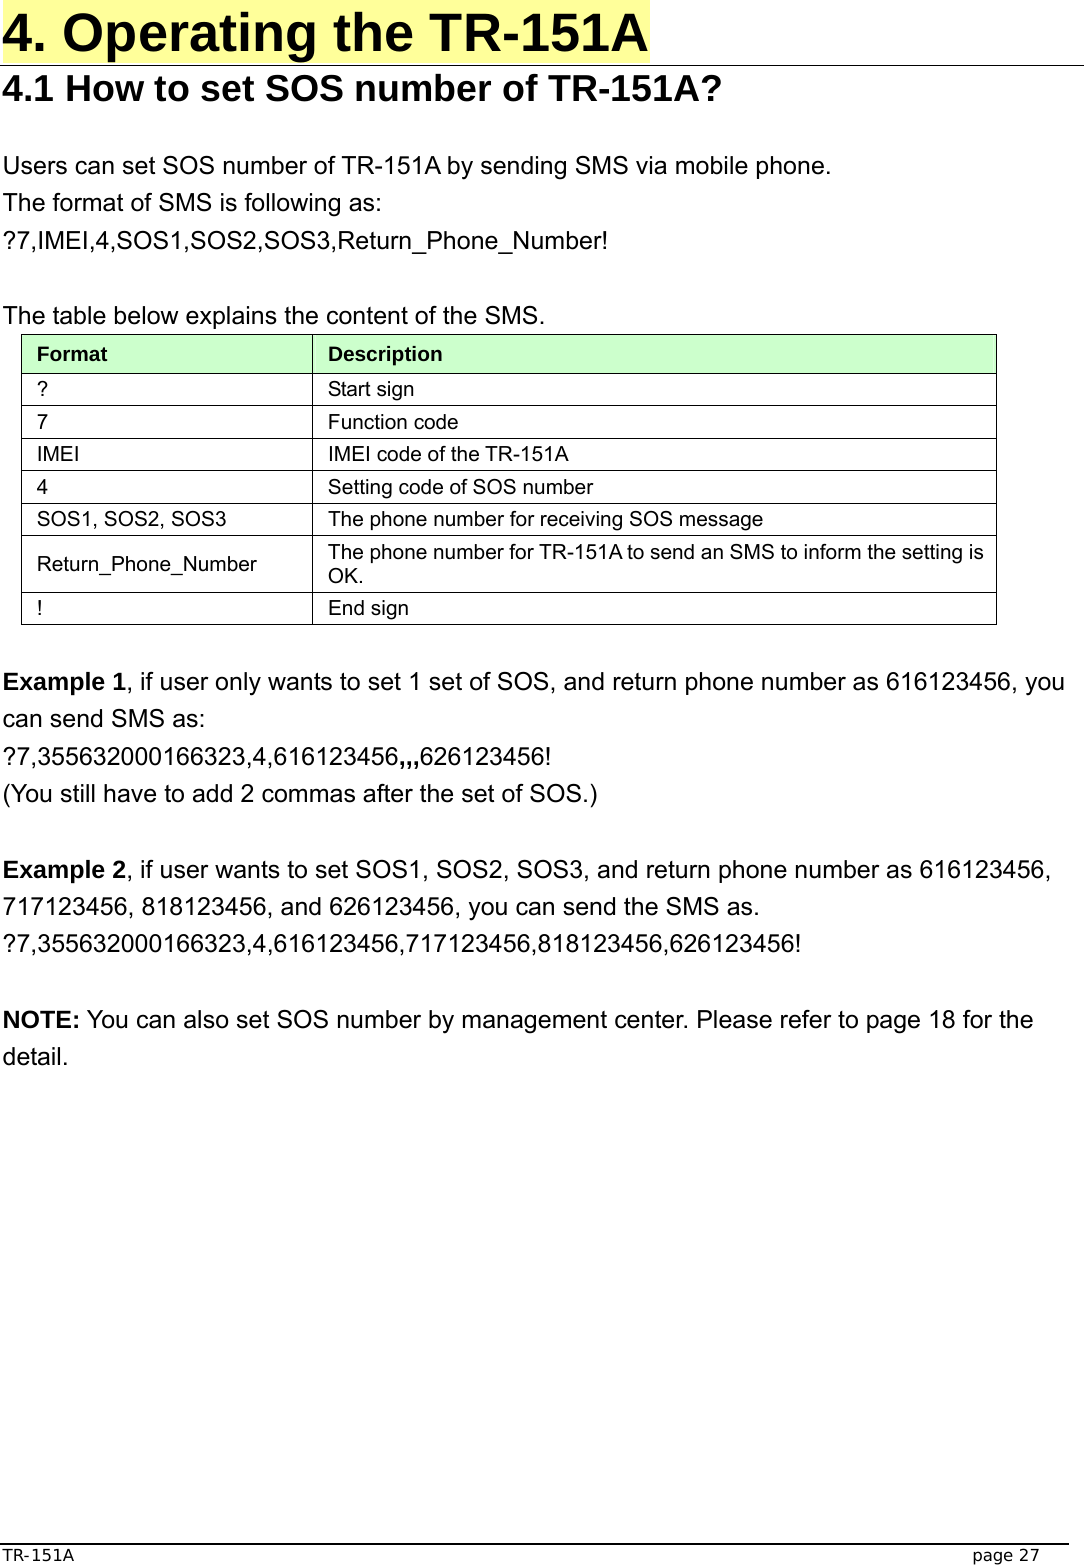  TR-151A   page 27 4. Operating the TR-151A 4.1 How to set SOS number of TR-151A?  Users can set SOS number of TR-151A by sending SMS via mobile phone. The format of SMS is following as: ?7,IMEI,4,SOS1,SOS2,SOS3,Return_Phone_Number!  The table below explains the content of the SMS. Format  Description ? Start sign  7 Function code  IMEI  IMEI code of the TR-151A 4  Setting code of SOS number SOS1, SOS2, SOS3  The phone number for receiving SOS message   Return_Phone_Number  The phone number for TR-151A to send an SMS to inform the setting is OK.  ! End sign  Example 1, if user only wants to set 1 set of SOS, and return phone number as 616123456, you can send SMS as: ?7,355632000166323,4,616123456,,,626123456! (You still have to add 2 commas after the set of SOS.)  Example 2, if user wants to set SOS1, SOS2, SOS3, and return phone number as 616123456, 717123456, 818123456, and 626123456, you can send the SMS as. ?7,355632000166323,4,616123456,717123456,818123456,626123456!  NOTE: You can also set SOS number by management center. Please refer to page 18 for the detail. 